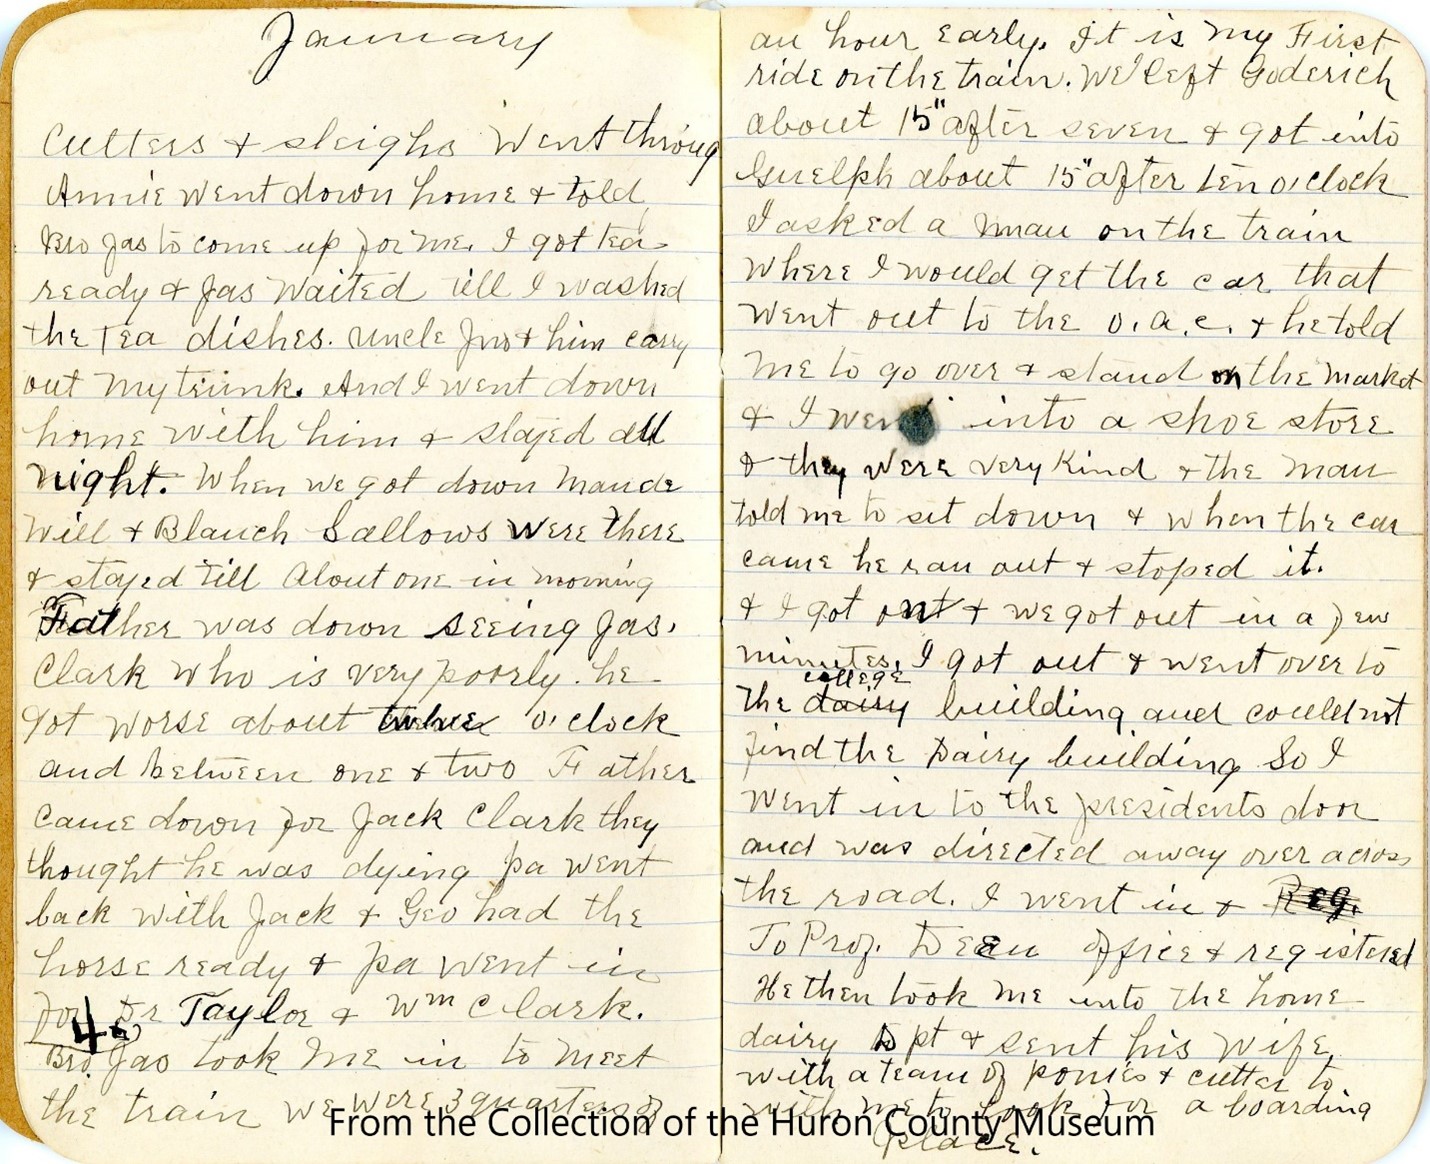 Photo of scanned pages from an historic diary written by Mary Longmore Green